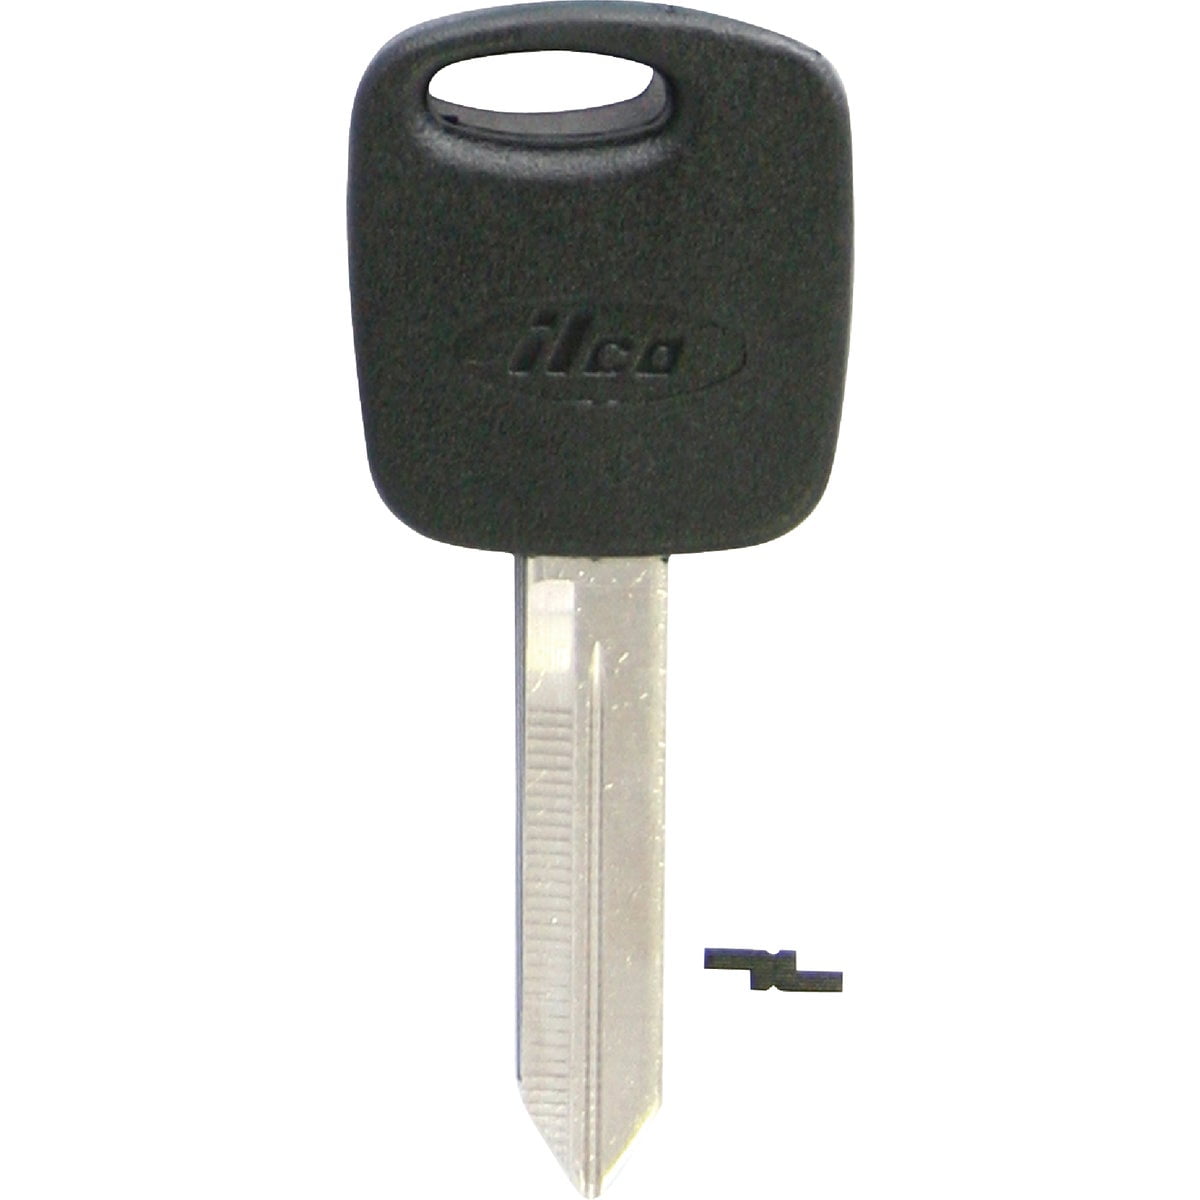 Kaba 1639 Larson DR Key44; Nickel Plated Brass44; Pack of 10 